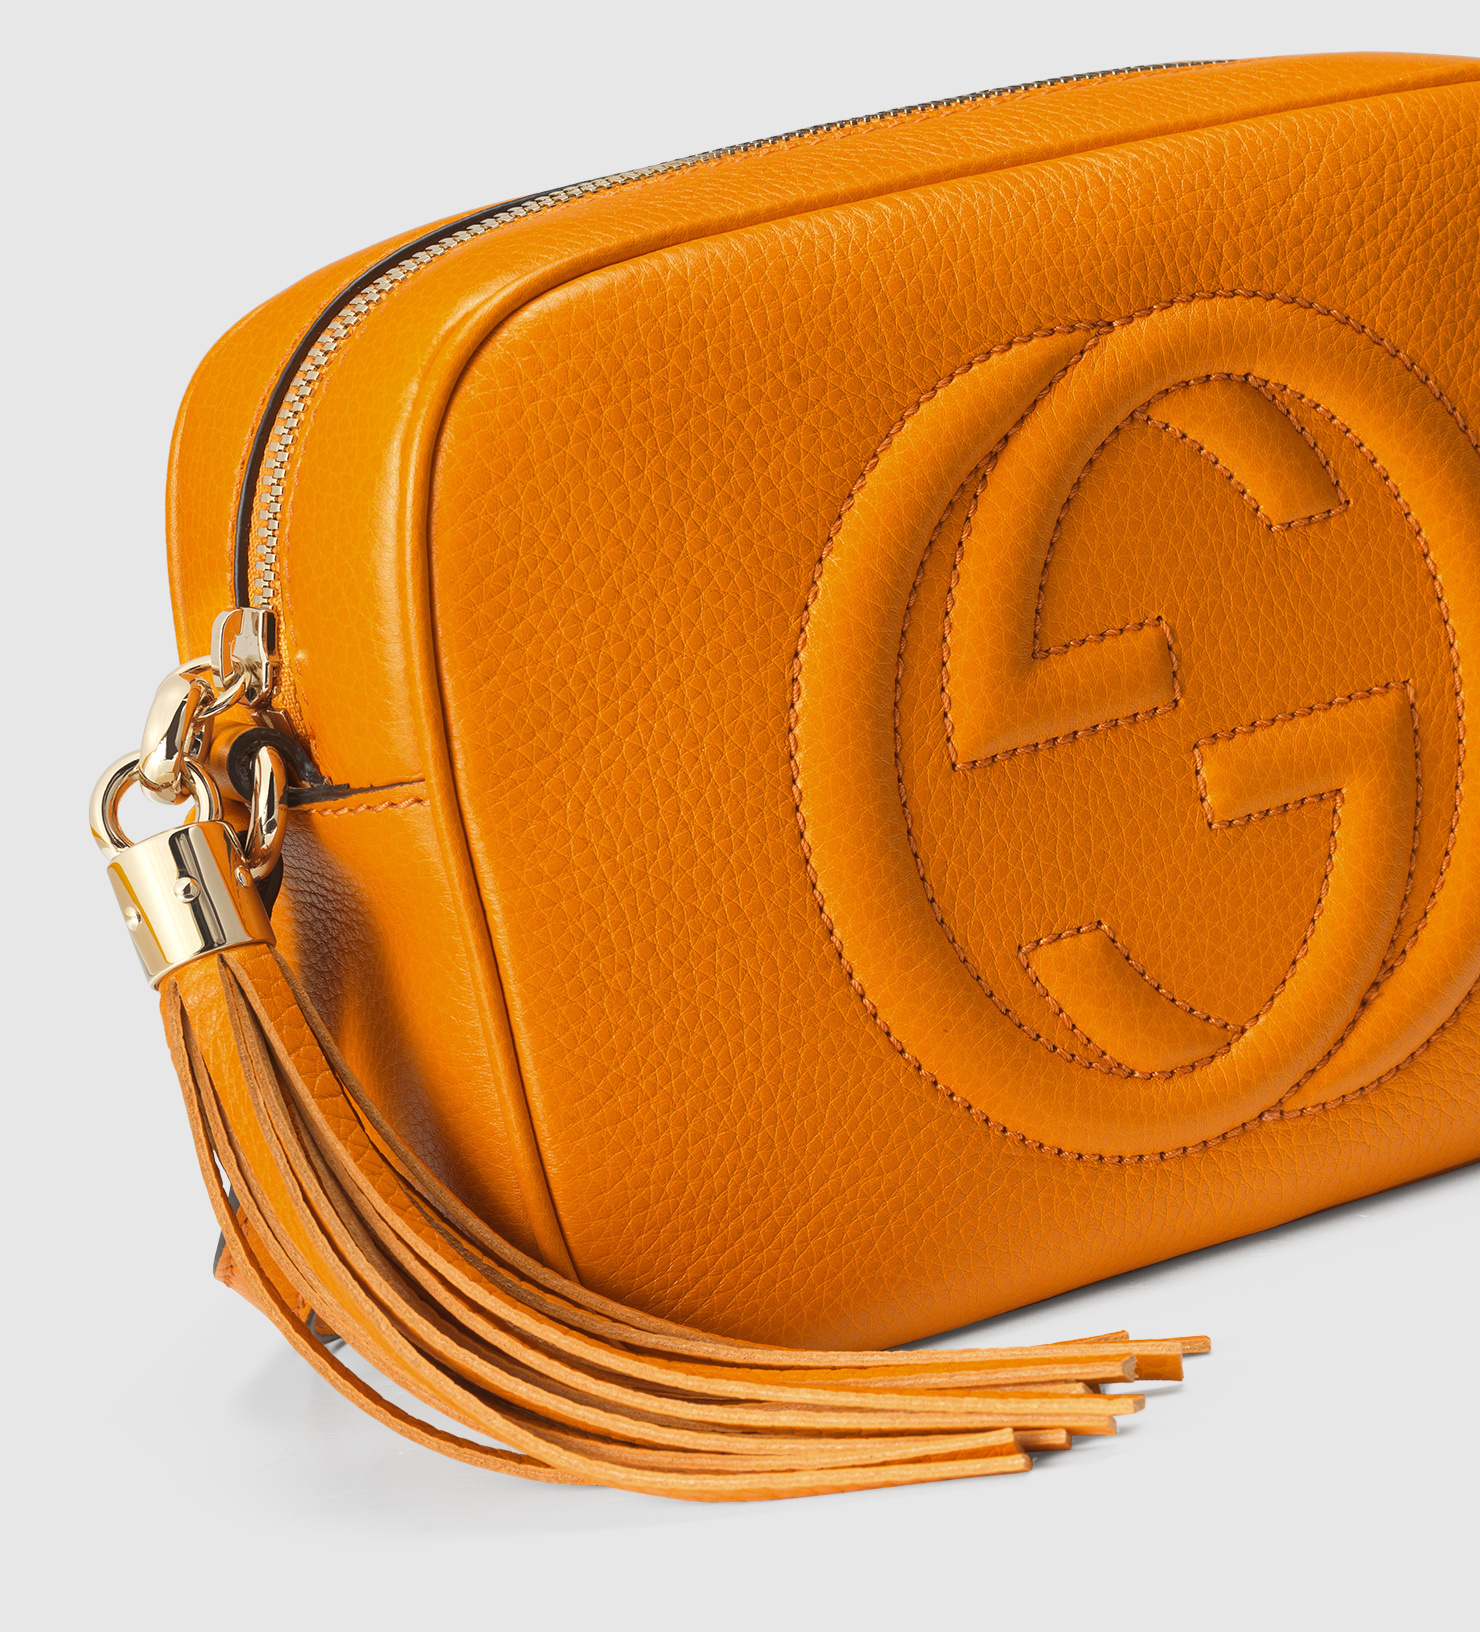 Gucci Soho Leather Disco Bag in Natural (Orange) - Lyst